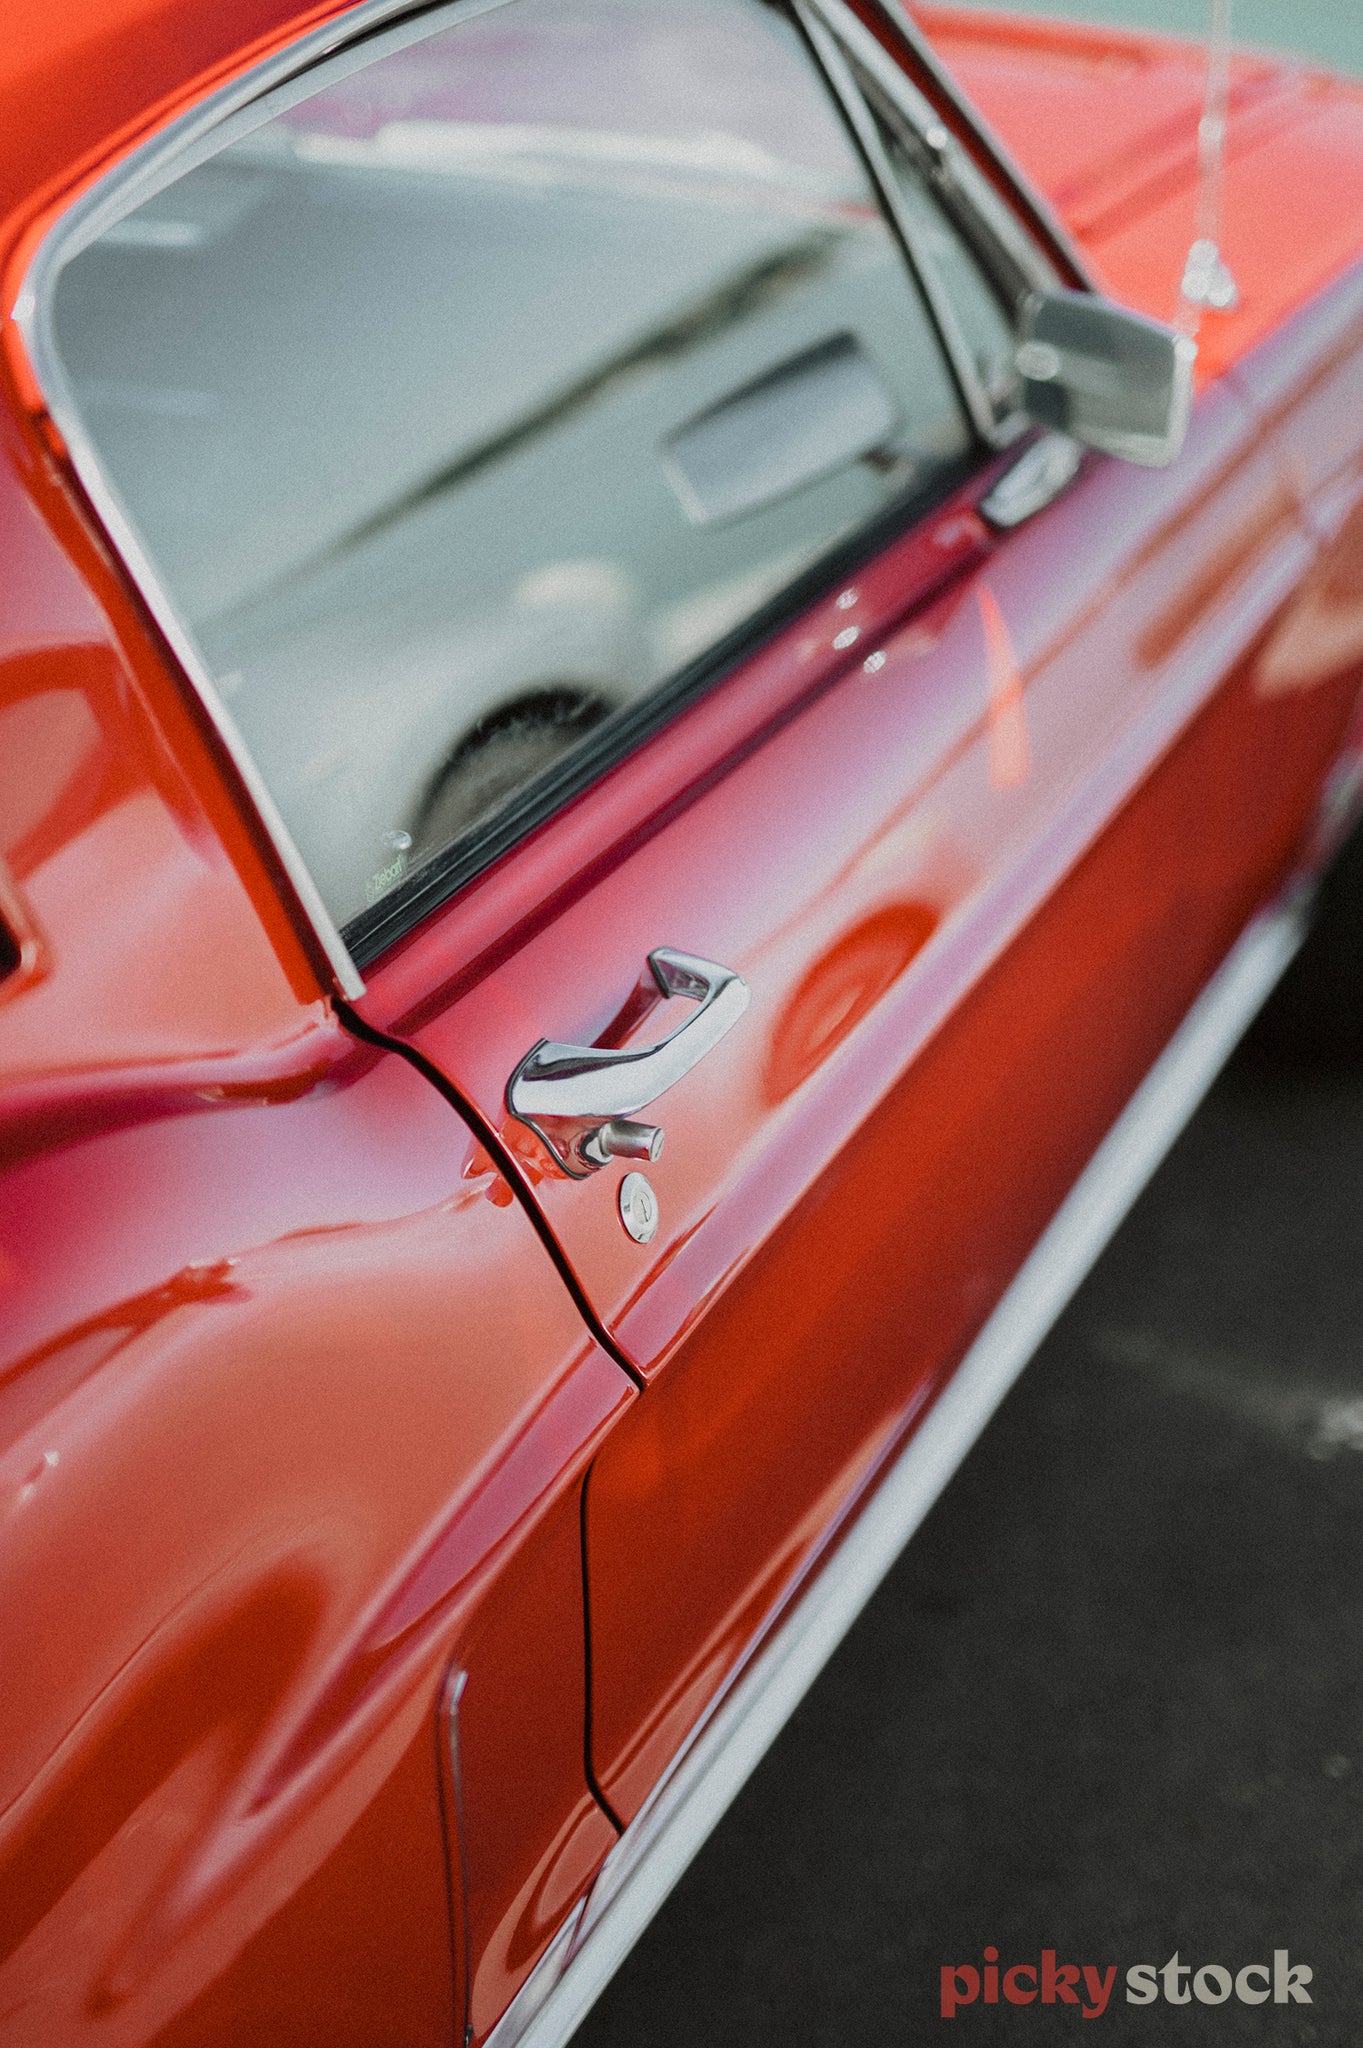 The right hand door of a red Mustang. Chrome door handle, wing mirror and accents.